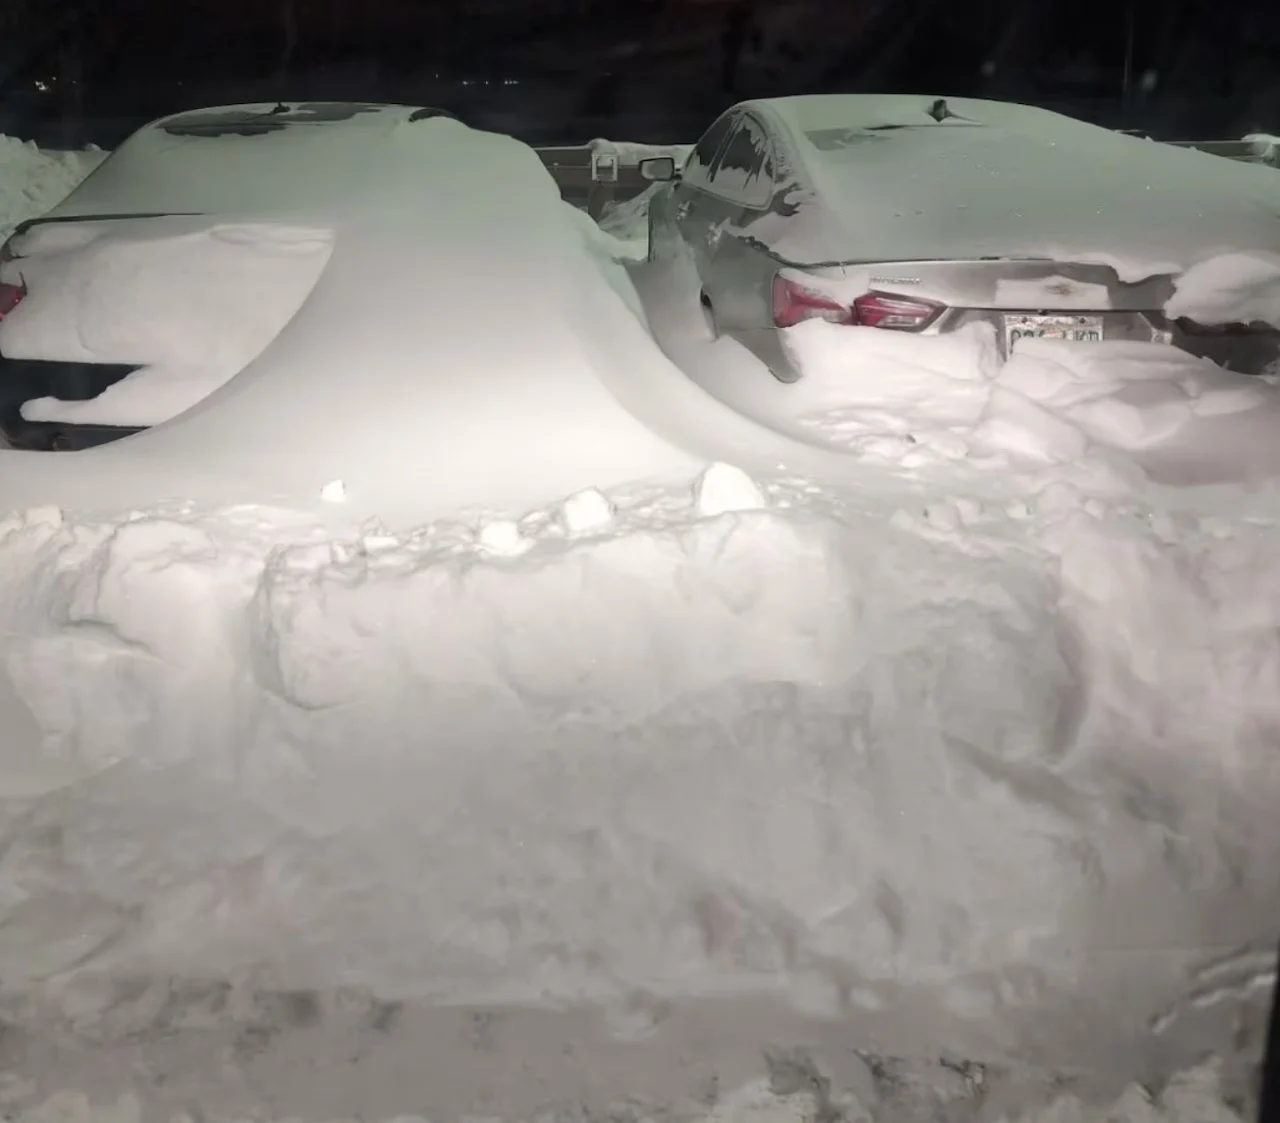 Snow covers vehicles in a parking lot in Saskatoon. Submitted by Benjamin Semynov via CBC